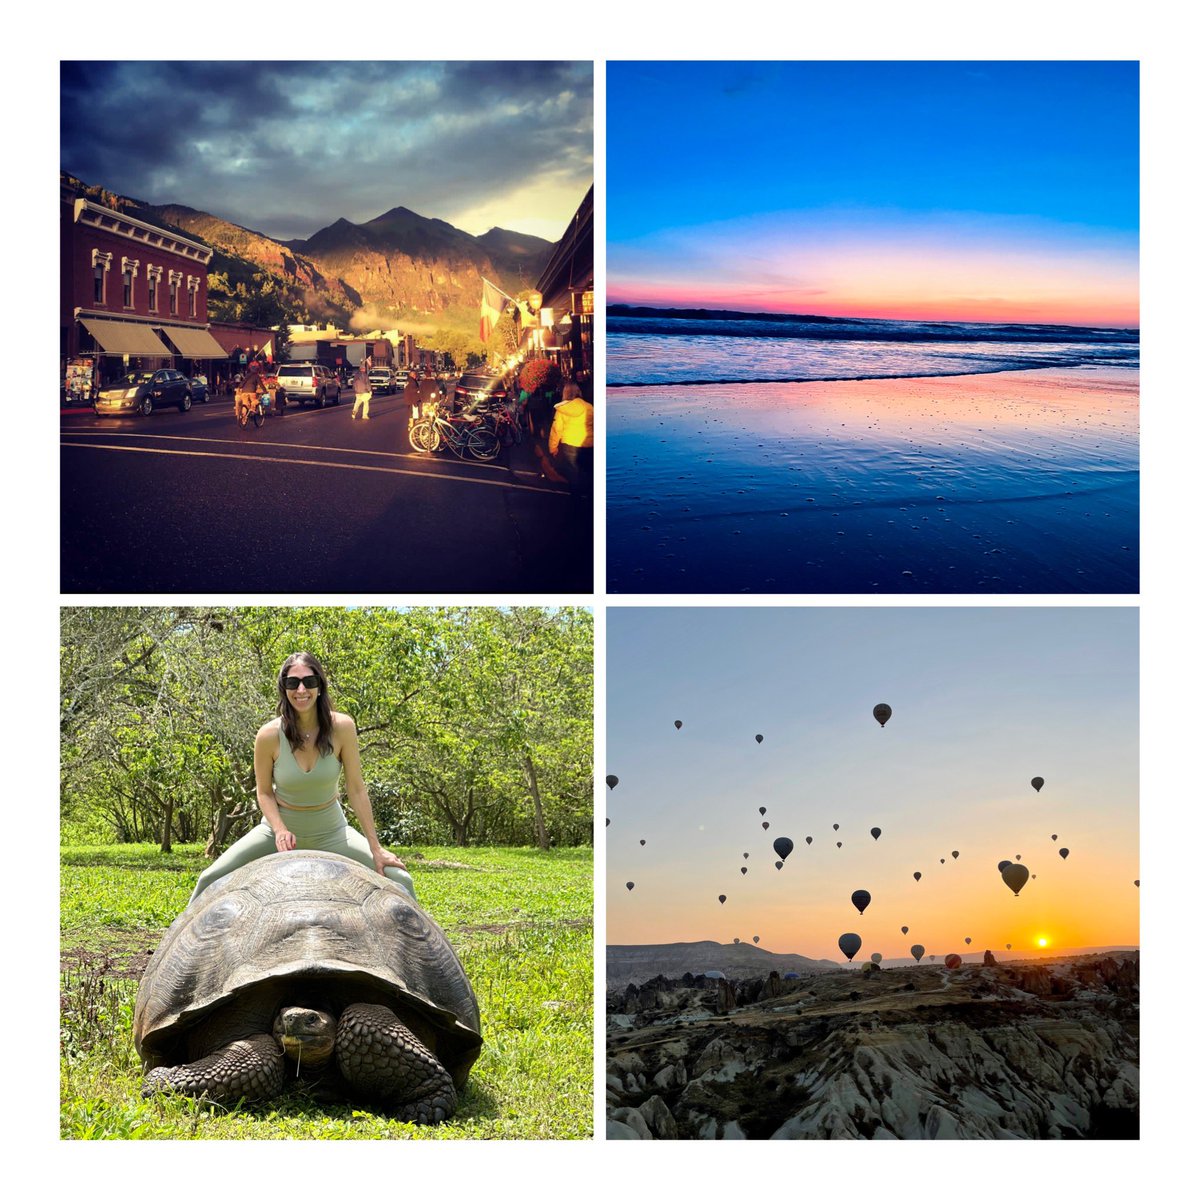 Happy #EarthDay! In honor of #EarthDay2024, I’m sharing photos from some of my favorite places in the world. Let’s take care of our beautiful Planet💗🌎 #TellurideColorado #SantaTeresaCostaRica #GalápagosIslands #CappadociaTurkey 

Note: I am NOT actually riding the 🐢